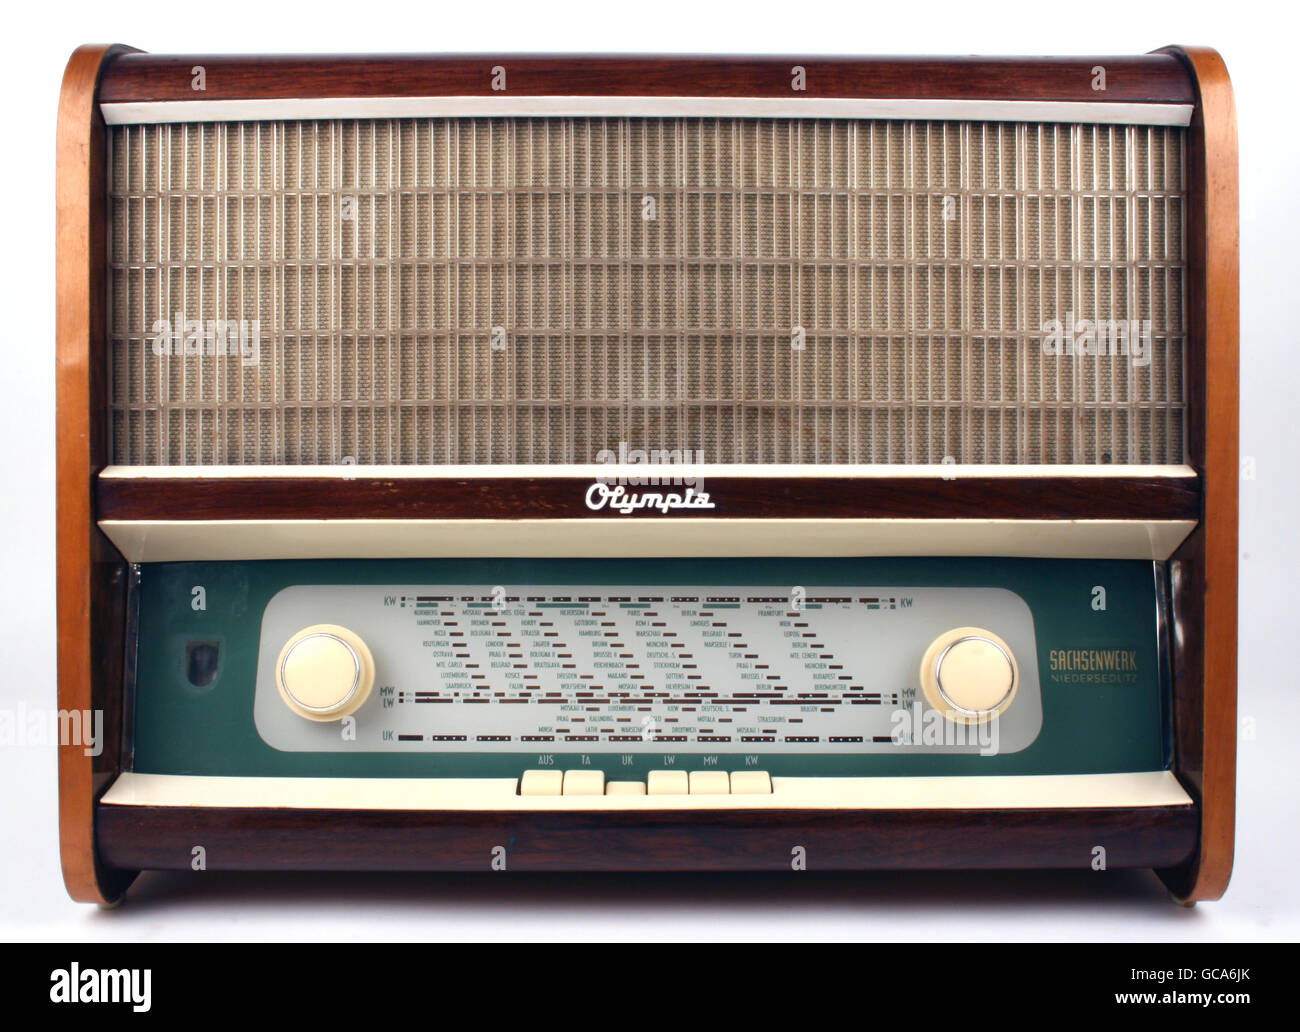 broadcast, radio, radio sets, Standardmittelsuper Olympia 573 W/L (luxury  version), made by VEB Sachsenwerk, Dresden-Niedersedlitz, GDR, 1957,  Additional-Rights-Clearences-Not Available Stock Photo - Alamy